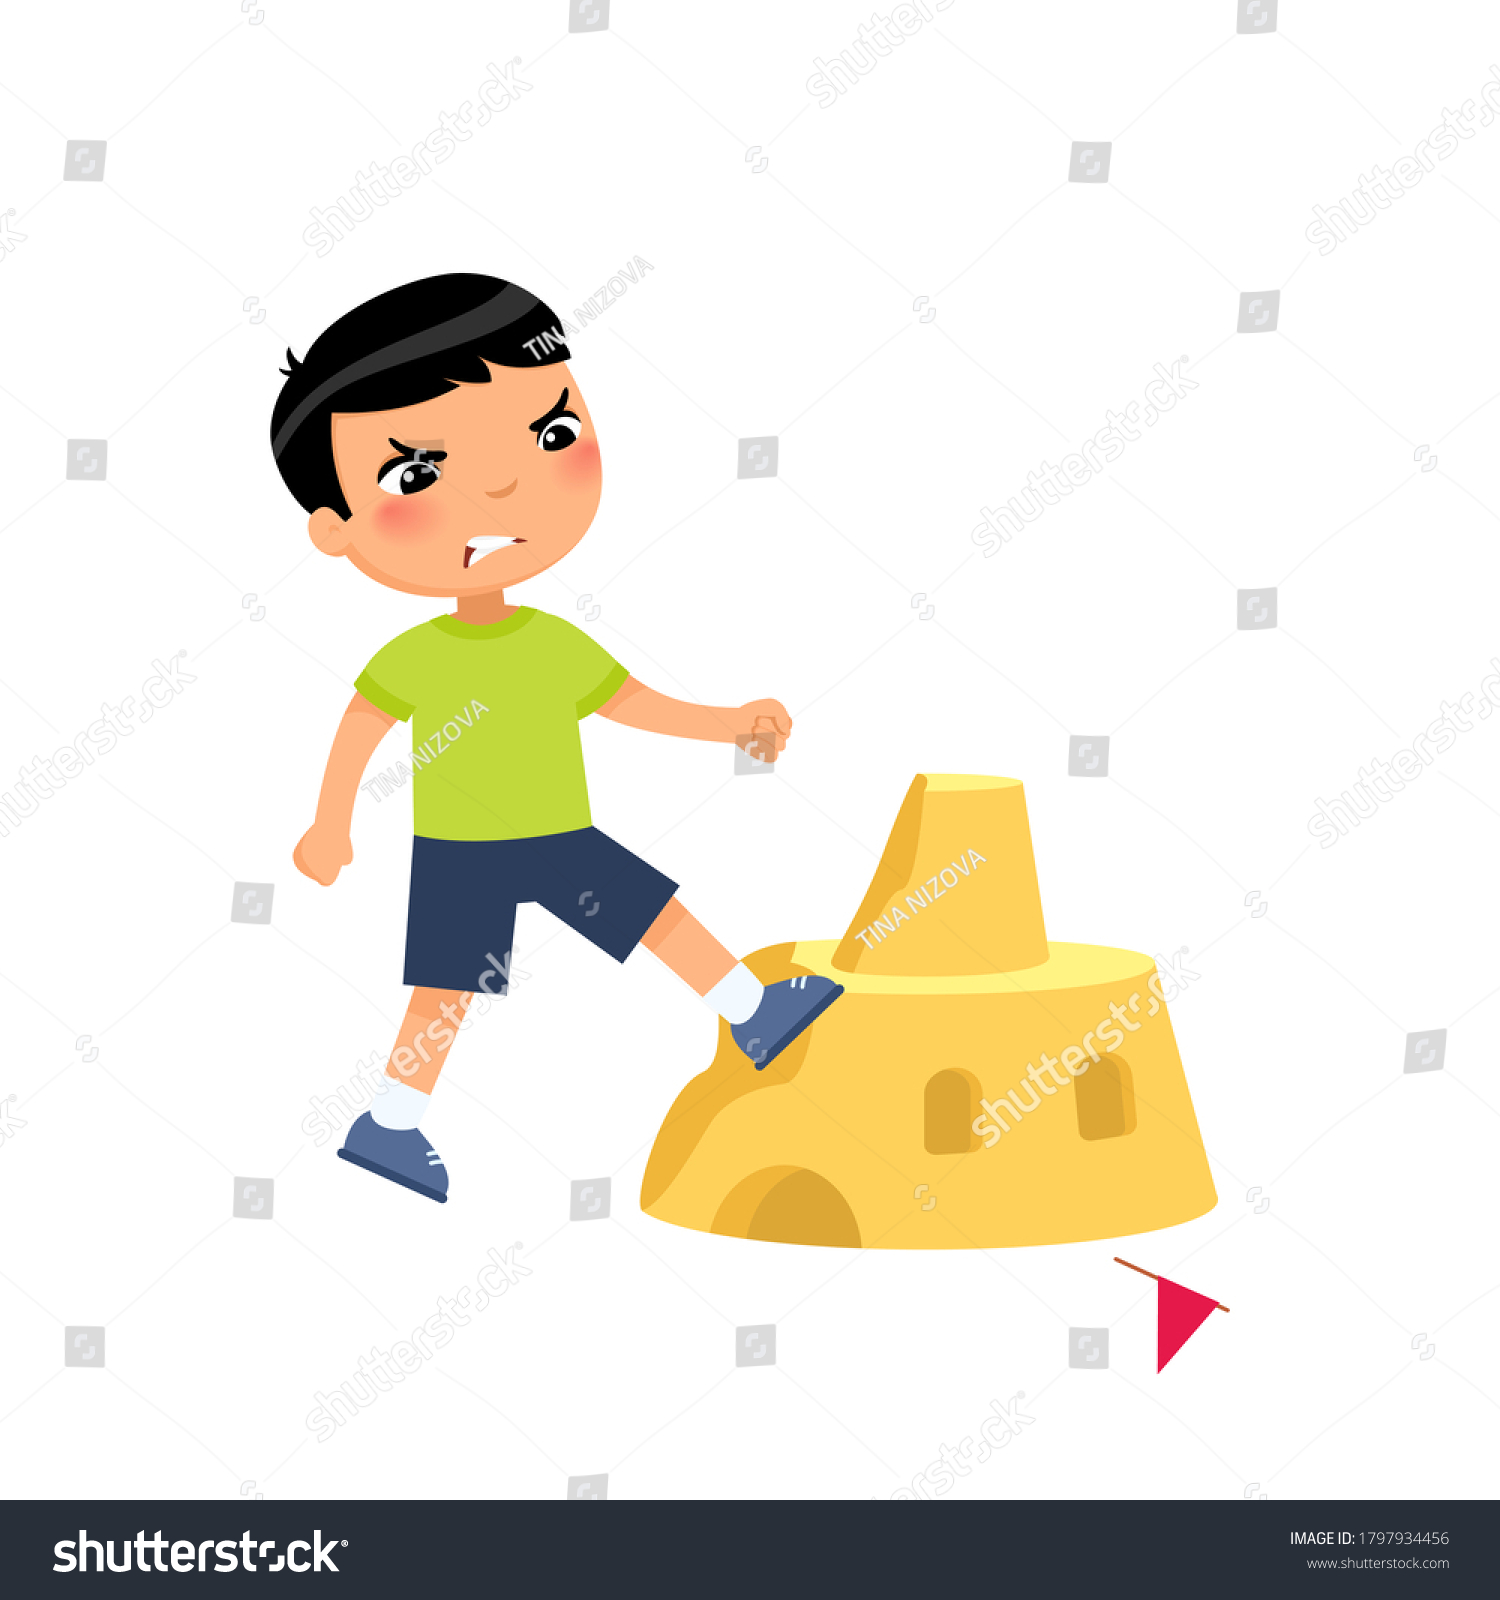 SVG of Angry asian boy destroying sandcastle flat vector illustration. Little kid breaking beach fortress cartoon character. Cruel child ruining sand tower isolated on white background. Violence concept svg